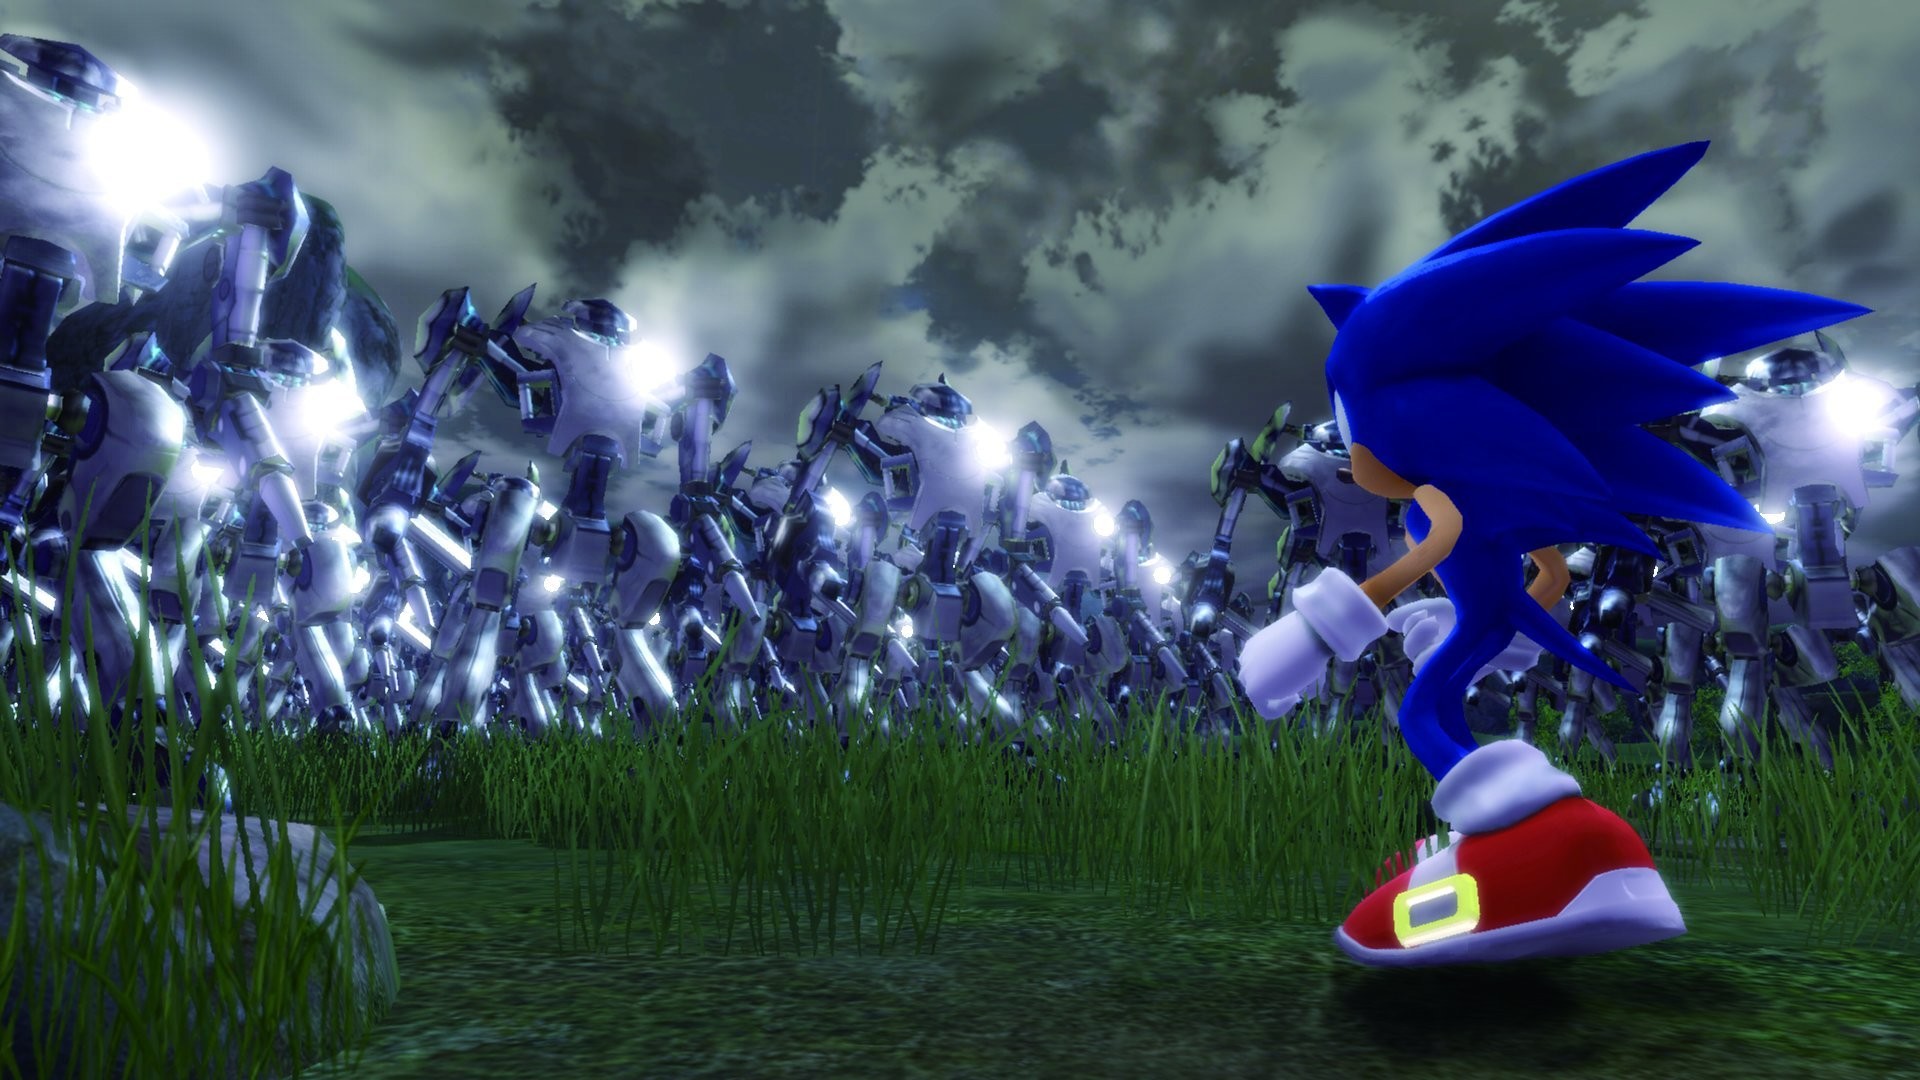 Steam WorkshopSonic 06 Japanese Website Wallpaper With His World